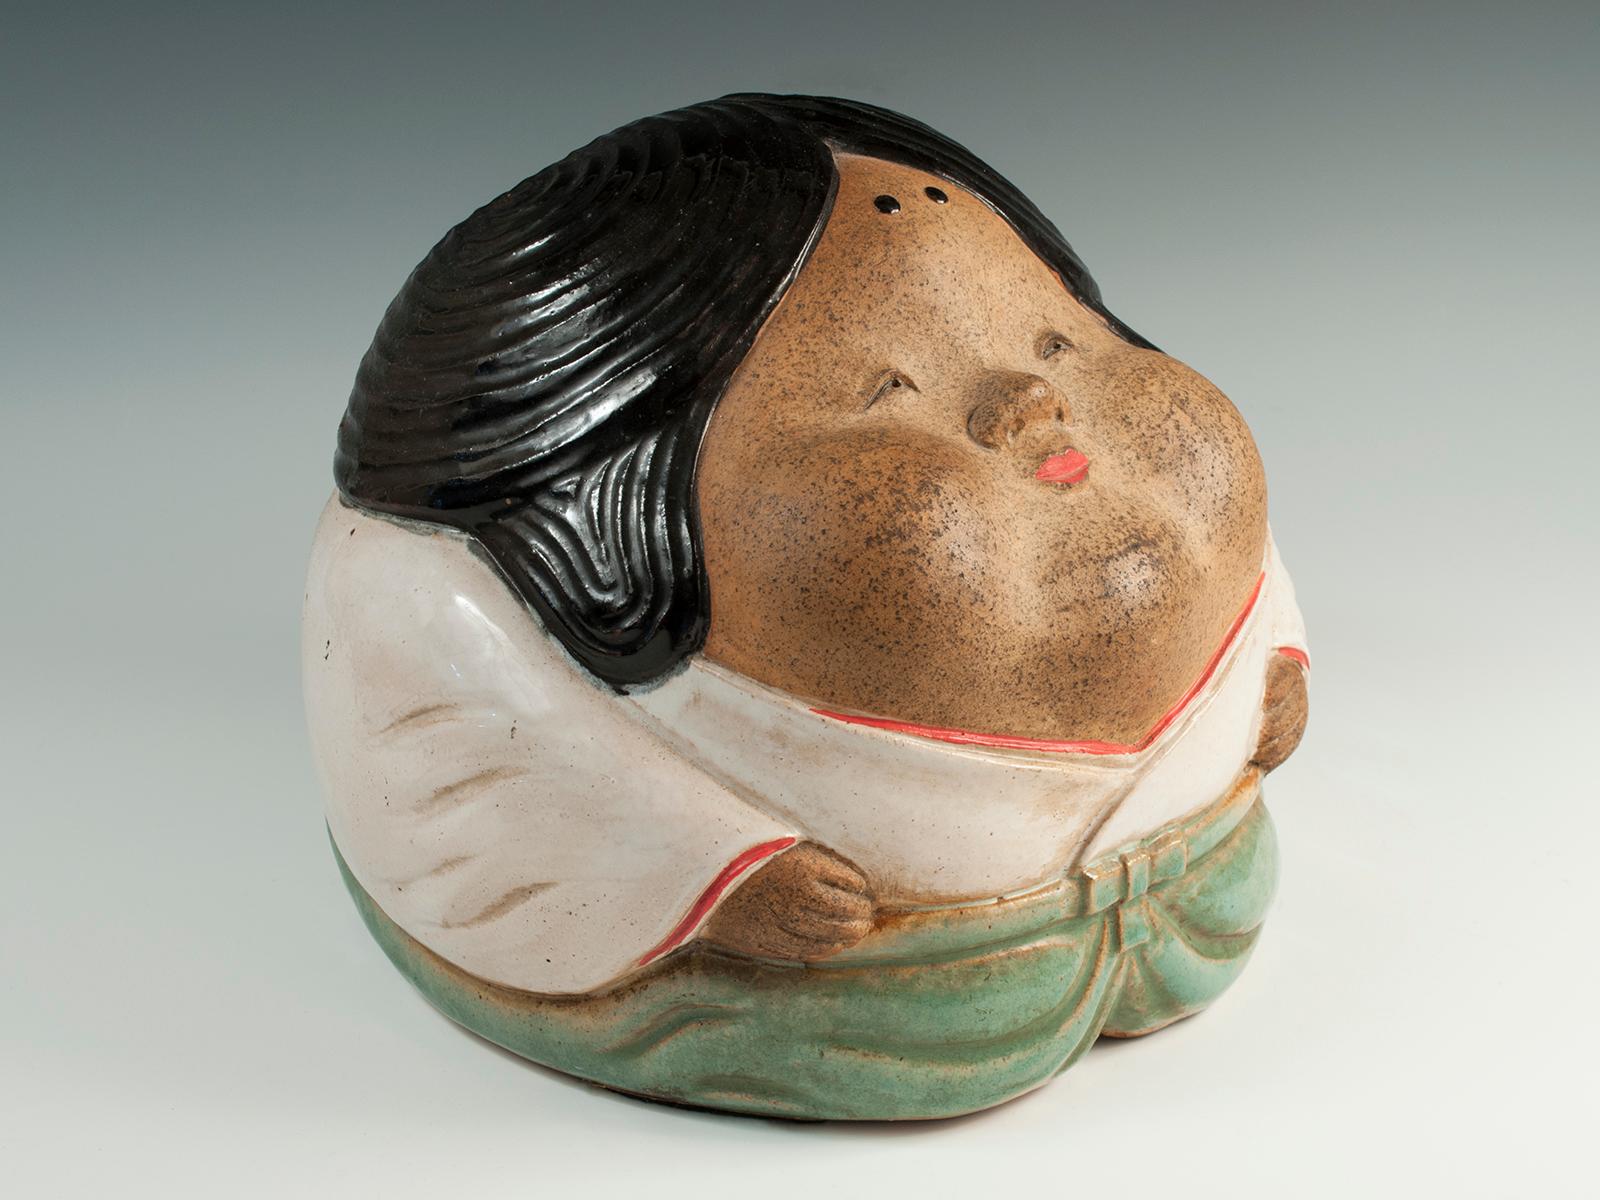 Offered by Zena Kruzick
Taisho Period Shigaraki Okame Hand Warmer, Japan

This charming Japanese stoneware hand warmer is in the form of the Noh theater character known as Okame (aka Otafuku). Okame is known as the goddess of mirth, while her